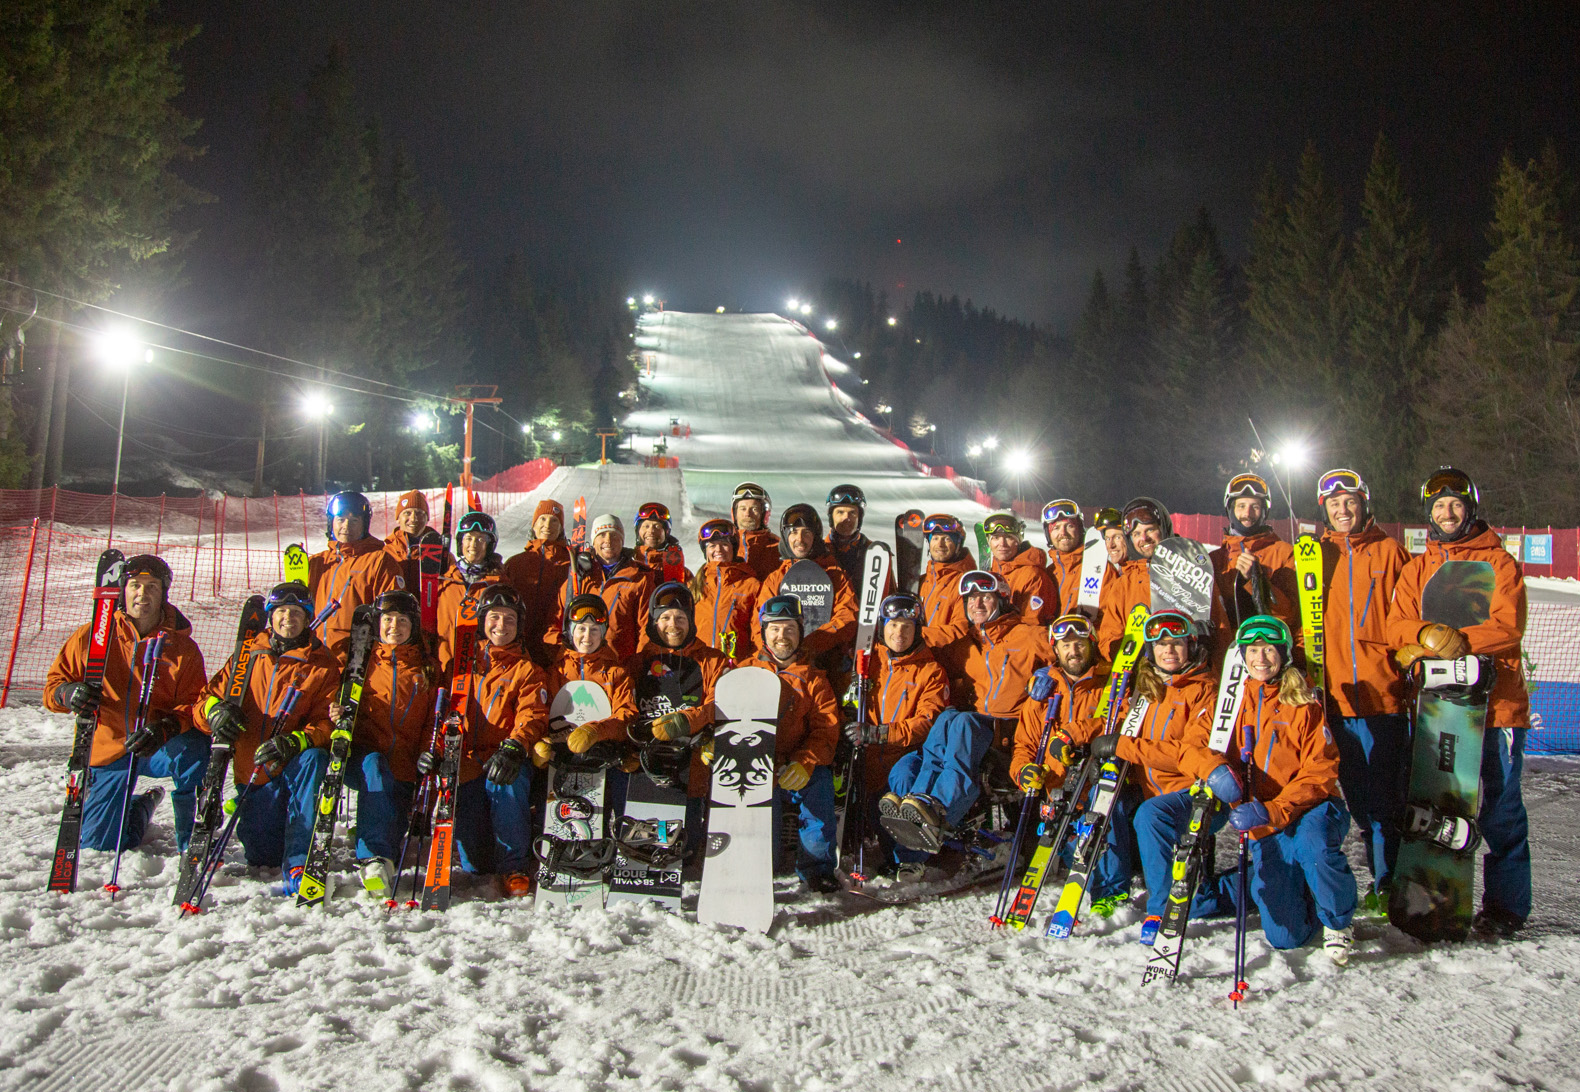 The PSIA-AASI National Team together at the base at the night skiing demo hill at Interski 2019